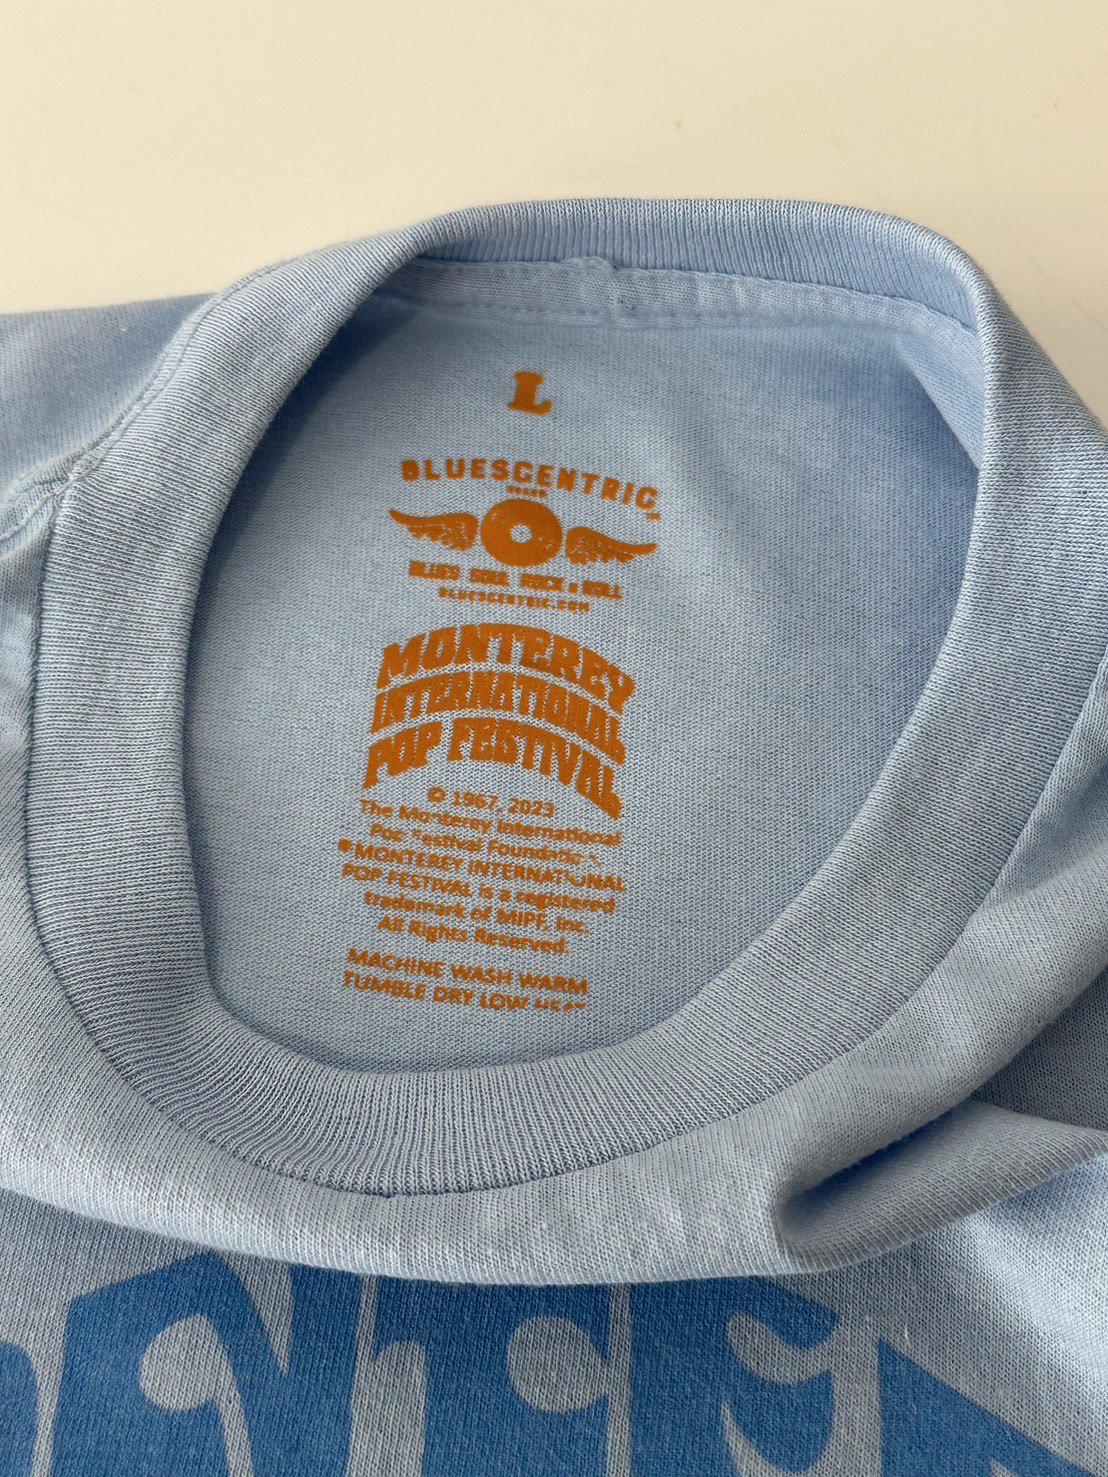 BLUESCENTRIC<br />MONTEREY POP FESTIVAL WAVE TEE / LT.BLUE<img class='new_mark_img2' src='https://img.shop-pro.jp/img/new/icons47.gif' style='border:none;display:inline;margin:0px;padding:0px;width:auto;' />